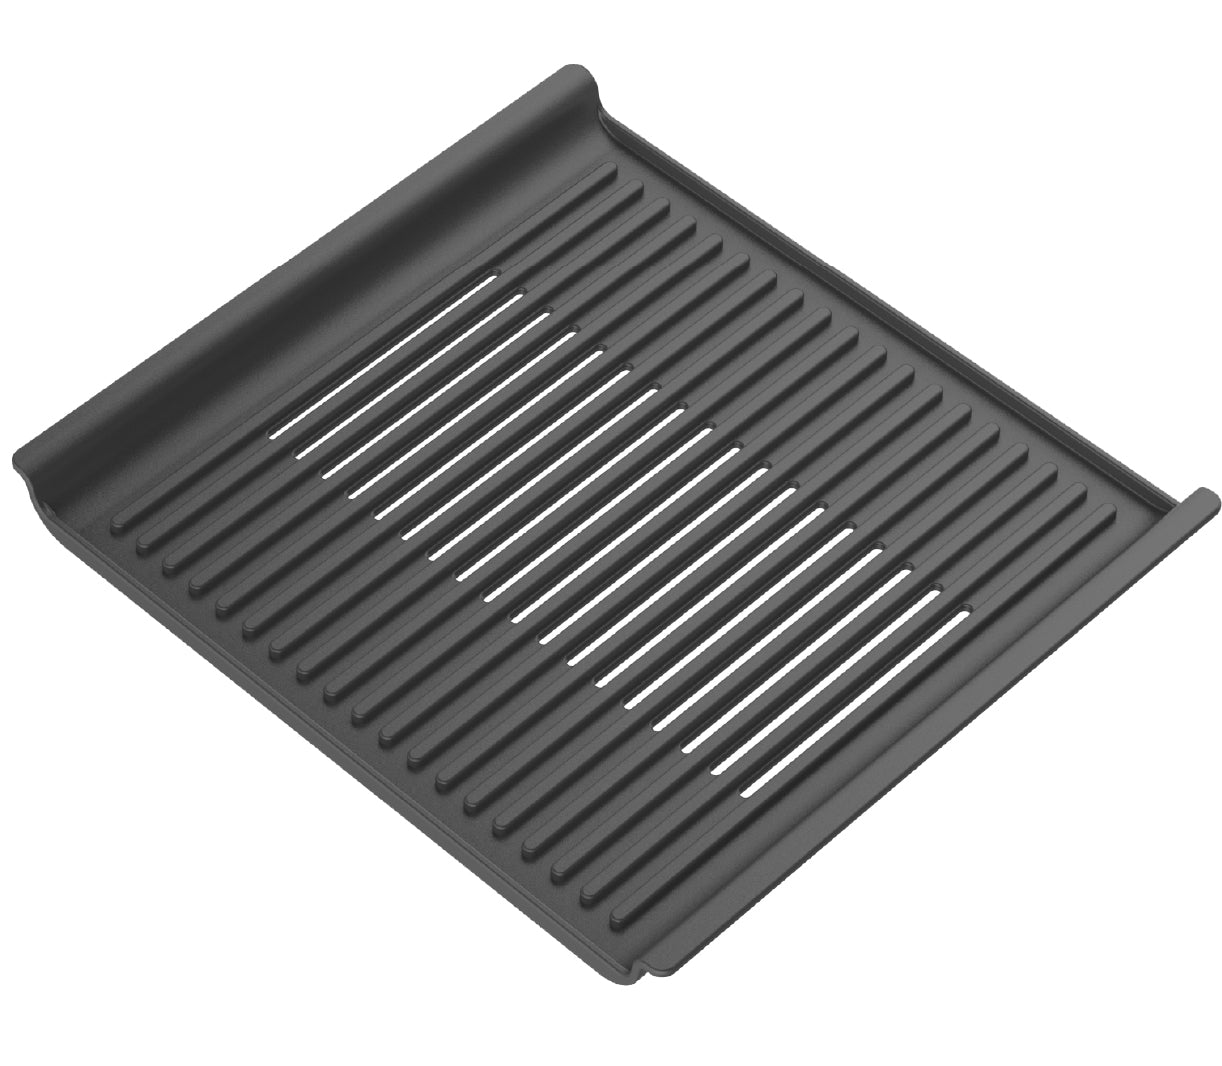 3D Oven Grill Tray